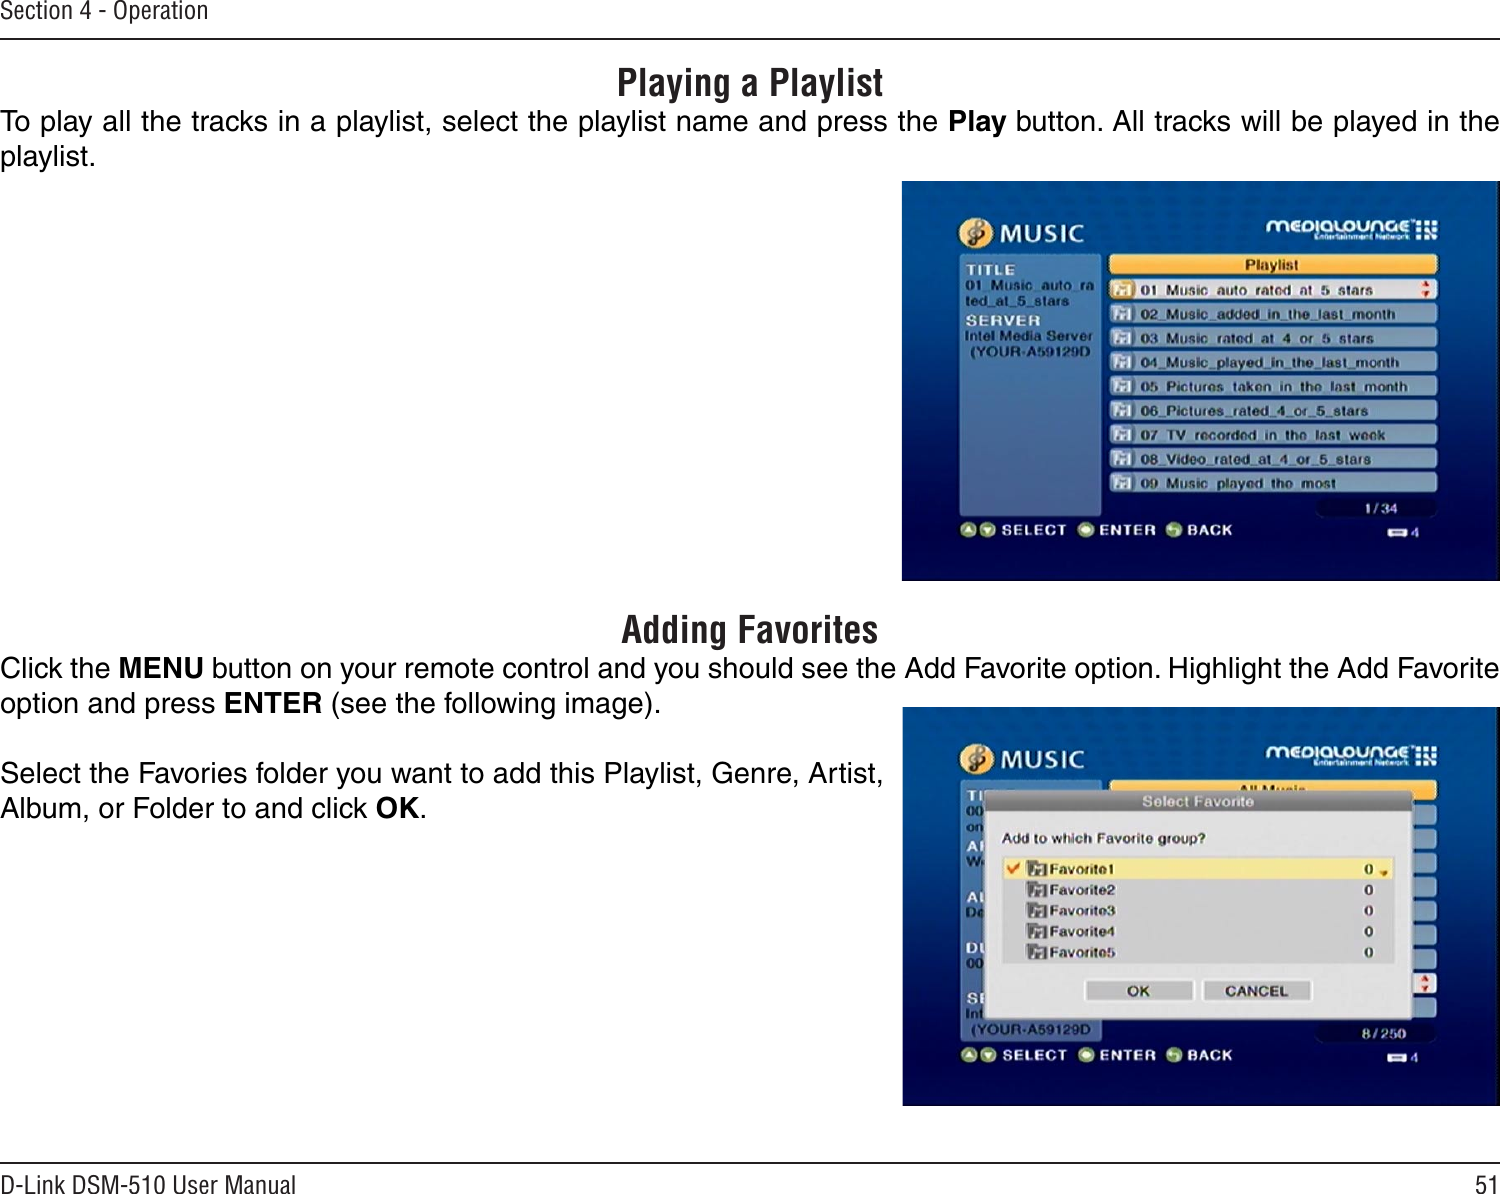 51D-Link DSM-510 User ManualSection 4 - OperationPlaying a PlaylistTo play all the tracks in a playlist, select the playlist name and press the Play button. All tracks will be played in the playlist.Adding FavoritesClick the MENU button on your remote control and you should see the Add Favorite option. Highlight the Add Favorite option and press ENTER (see the following image). Select the Favories folder you want to add this Playlist, Genre, Artist, Album, or Folder to and click OK.